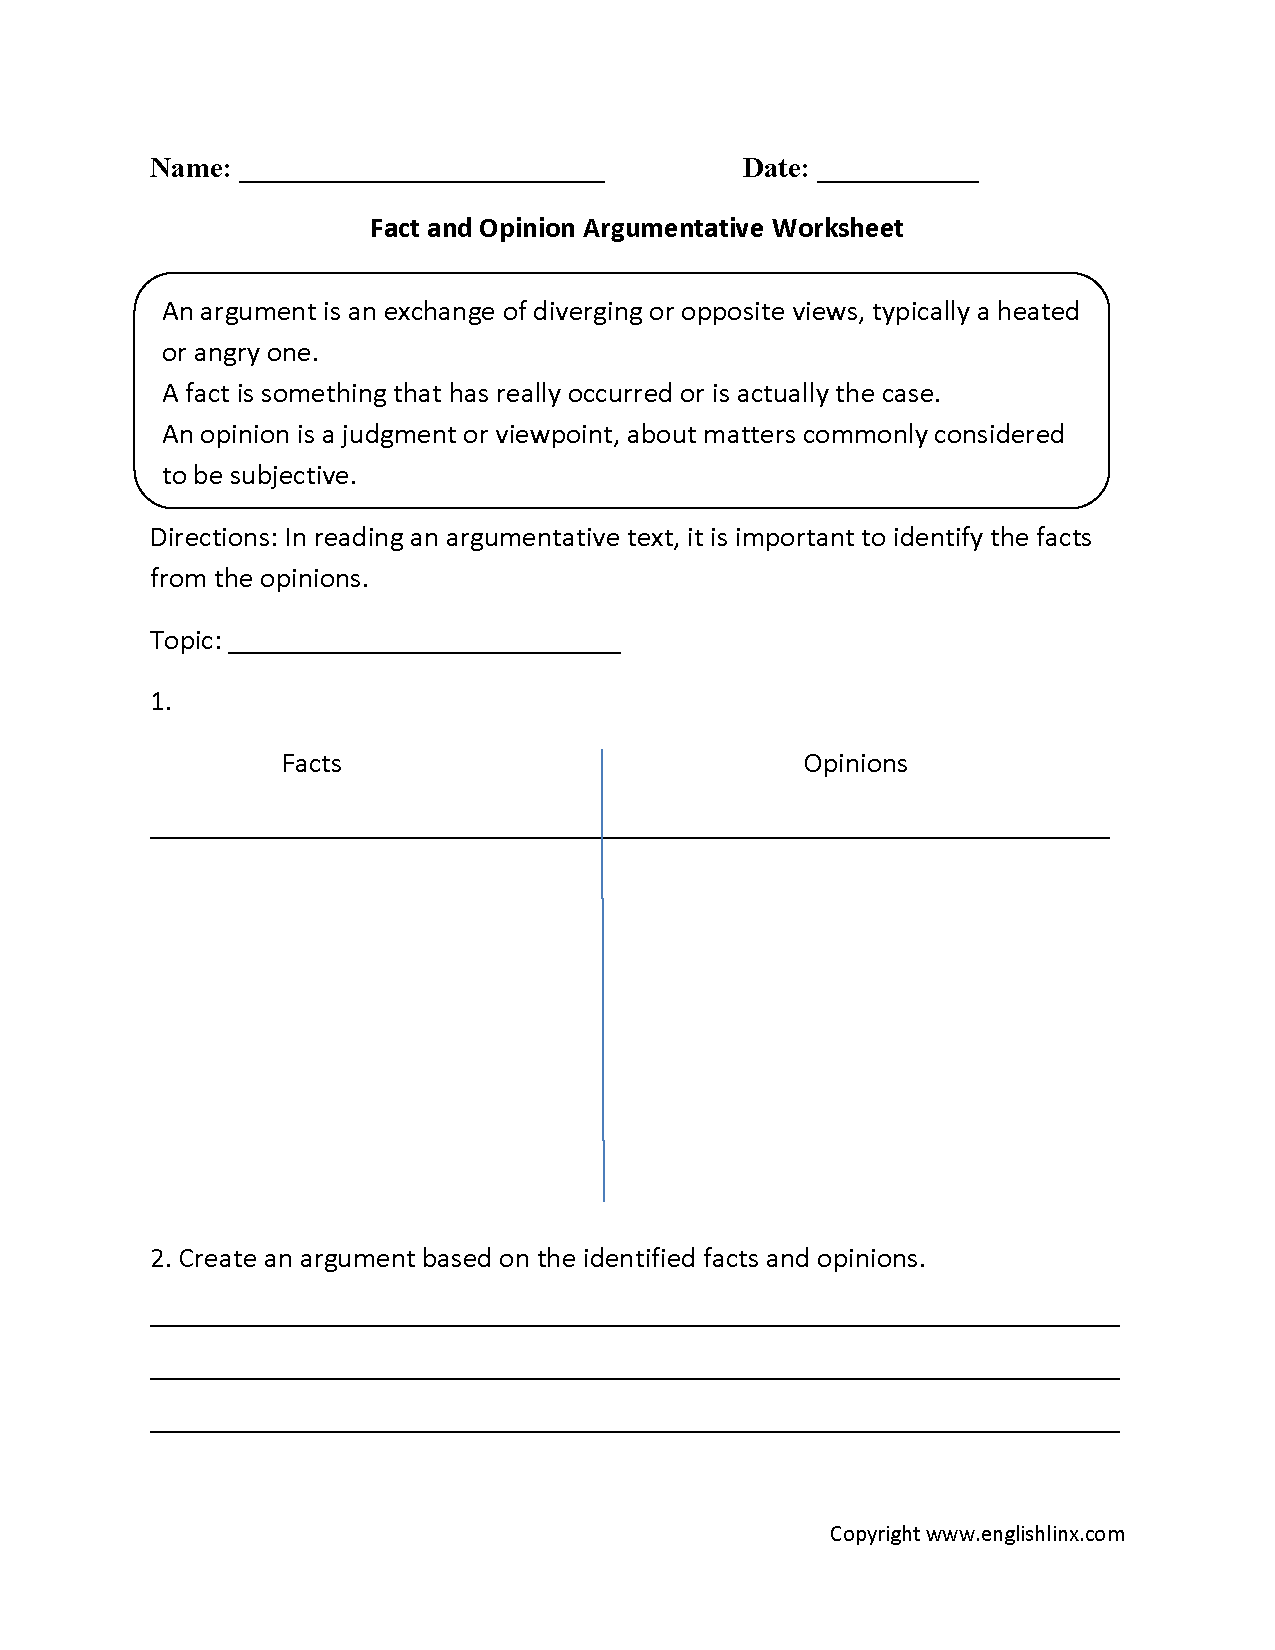 Fact and Opinion Argumentative Worksheets